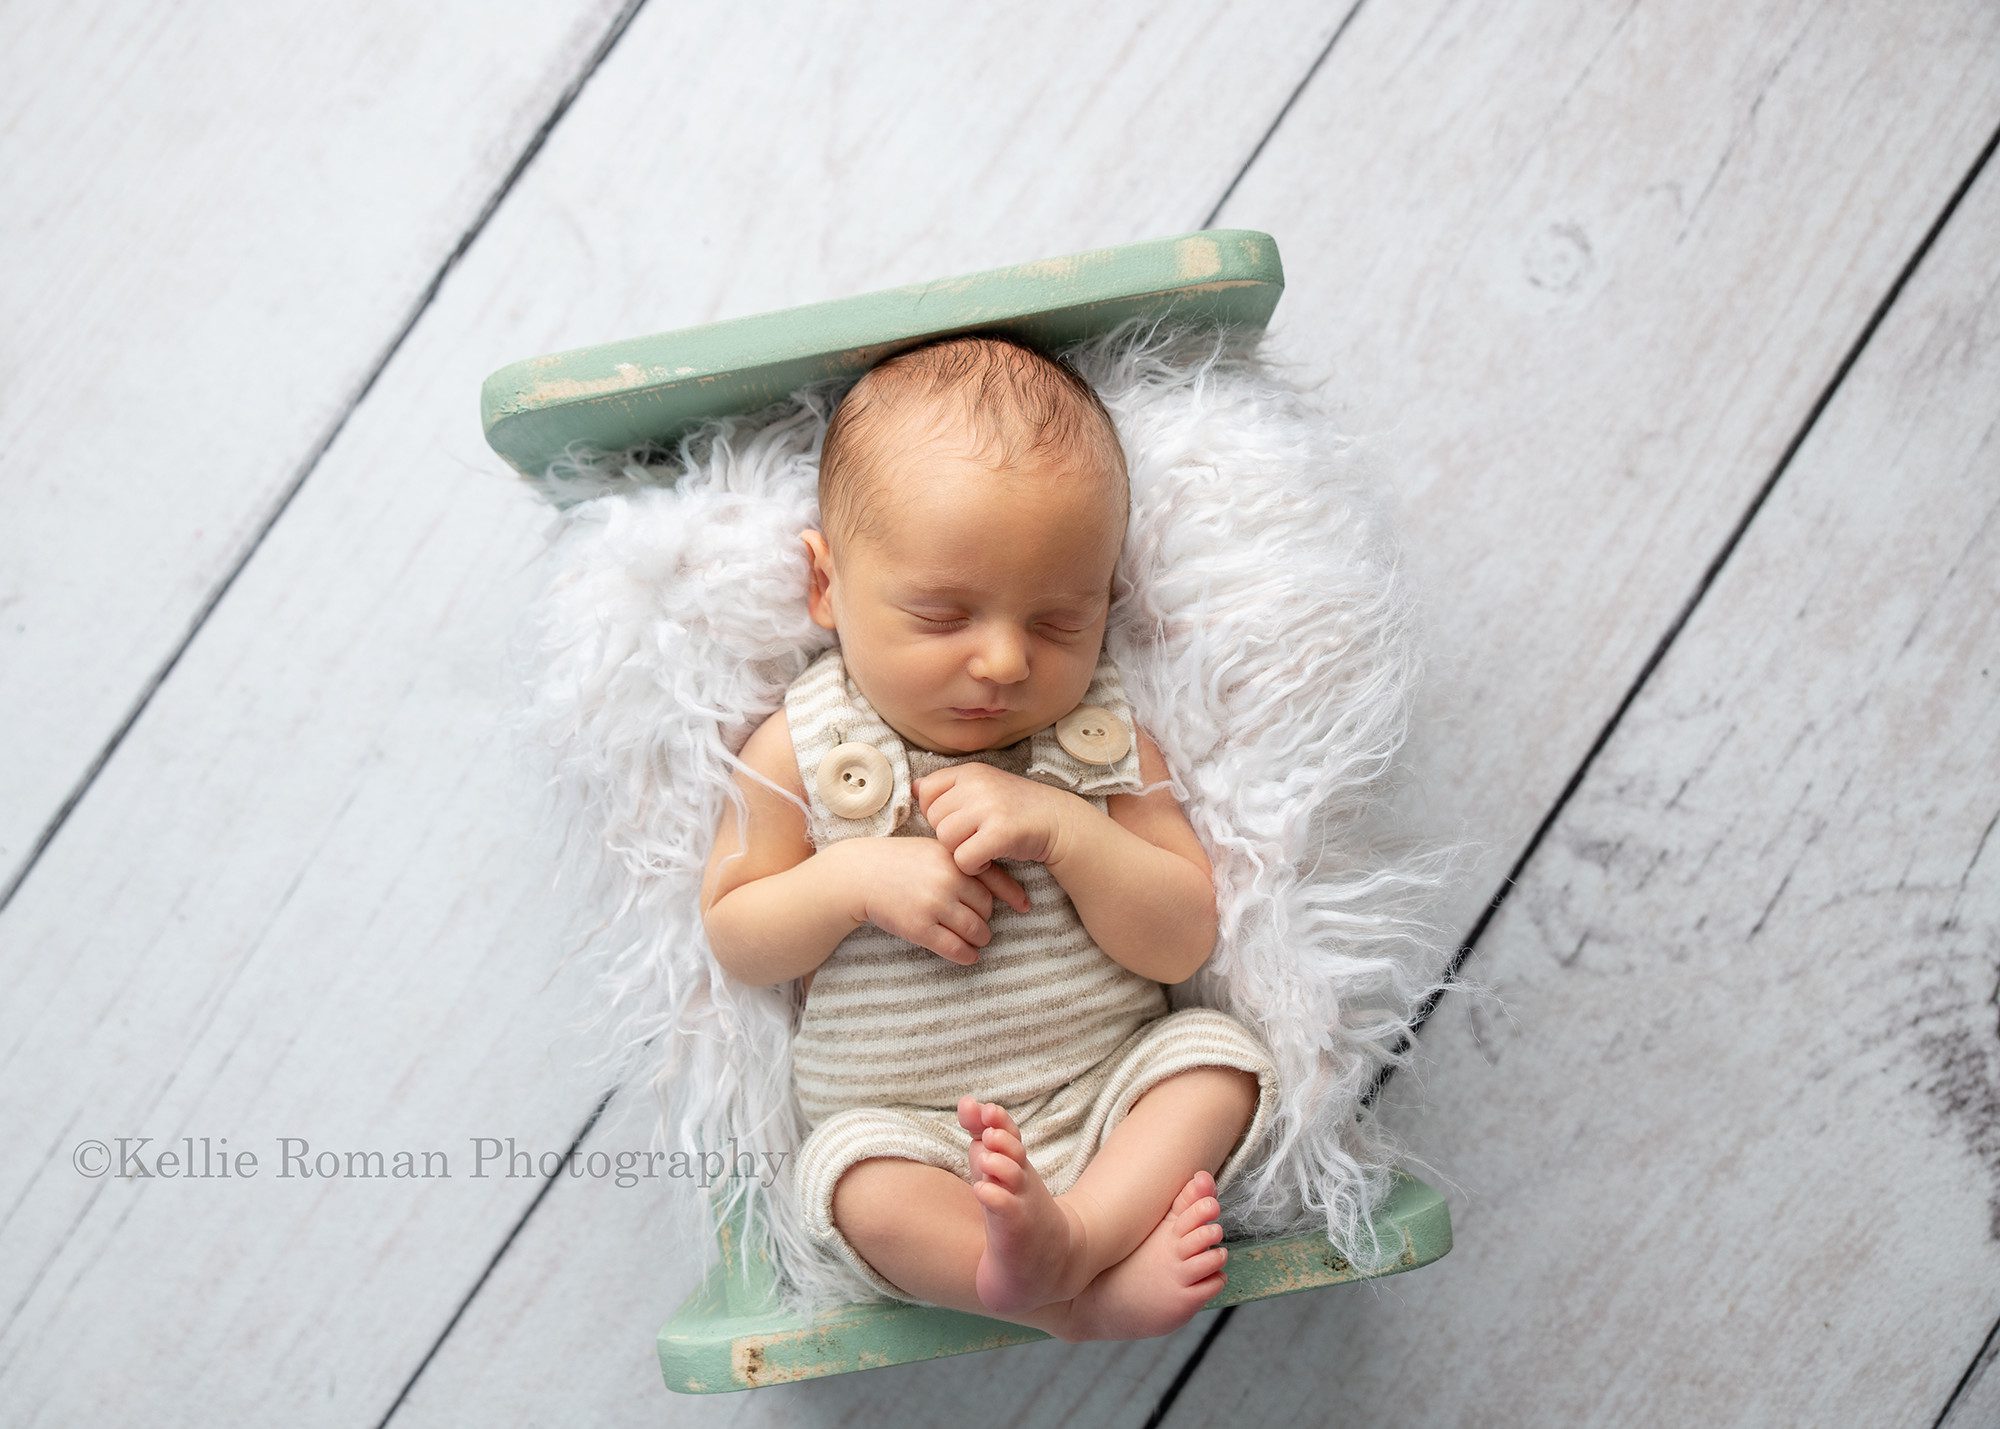 rainbow baby a newborn infant boy sleeping on his back on top of cream colored fur which is placed in a mint colored wood bed the bed is on top of white wood flooring the baby boy is wearing a cream and brown striped romper with big wood buttons he's being photographed in milwaukee photo studio